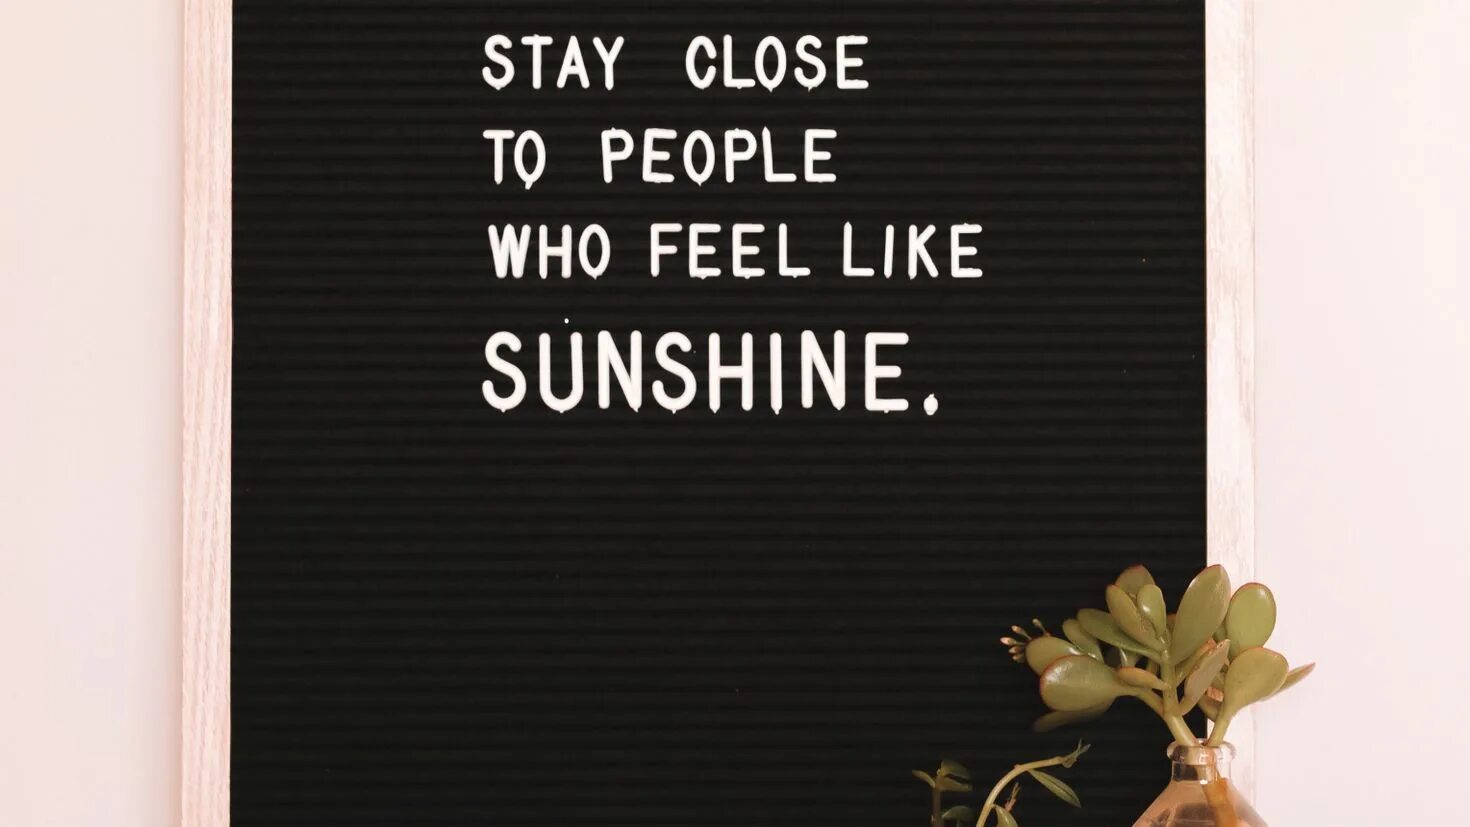 Feels like close. Stay close to people who feel like Sunshine. Фразы со словом stay. Майка stay close to people who feel like Sunshine. Quotes inscription.